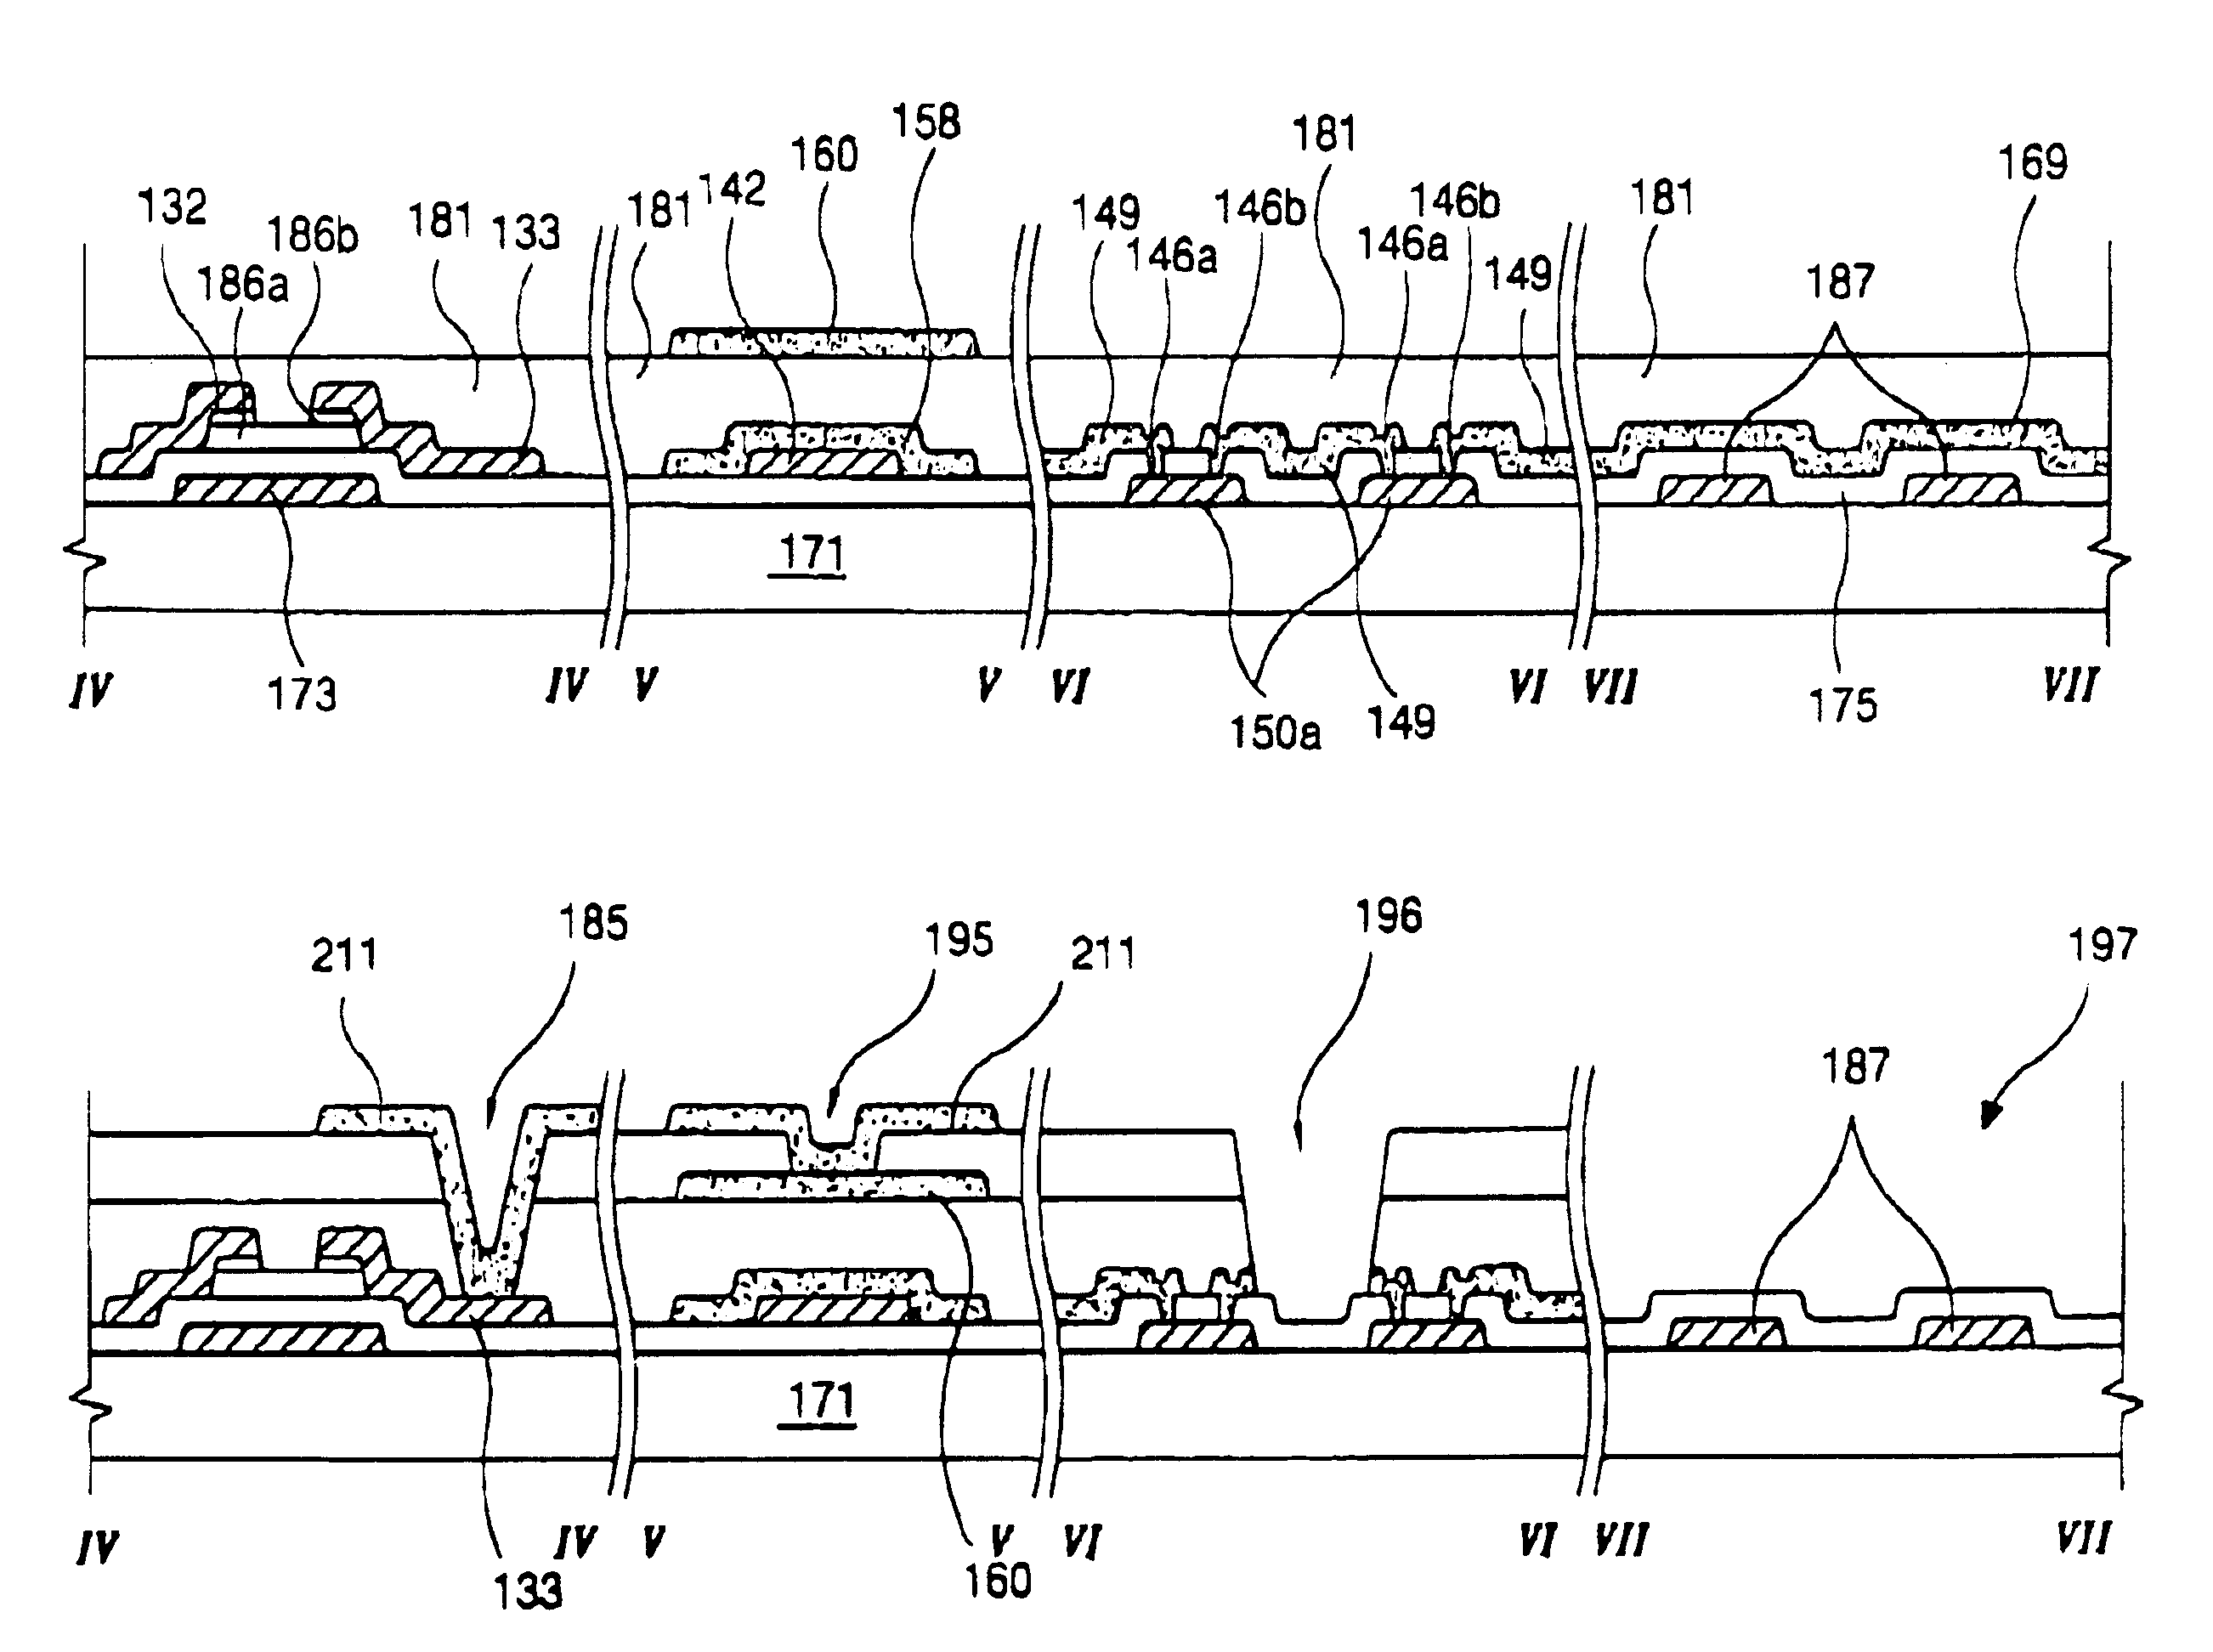 Method of fabricating an array substrate for an x-ray detector